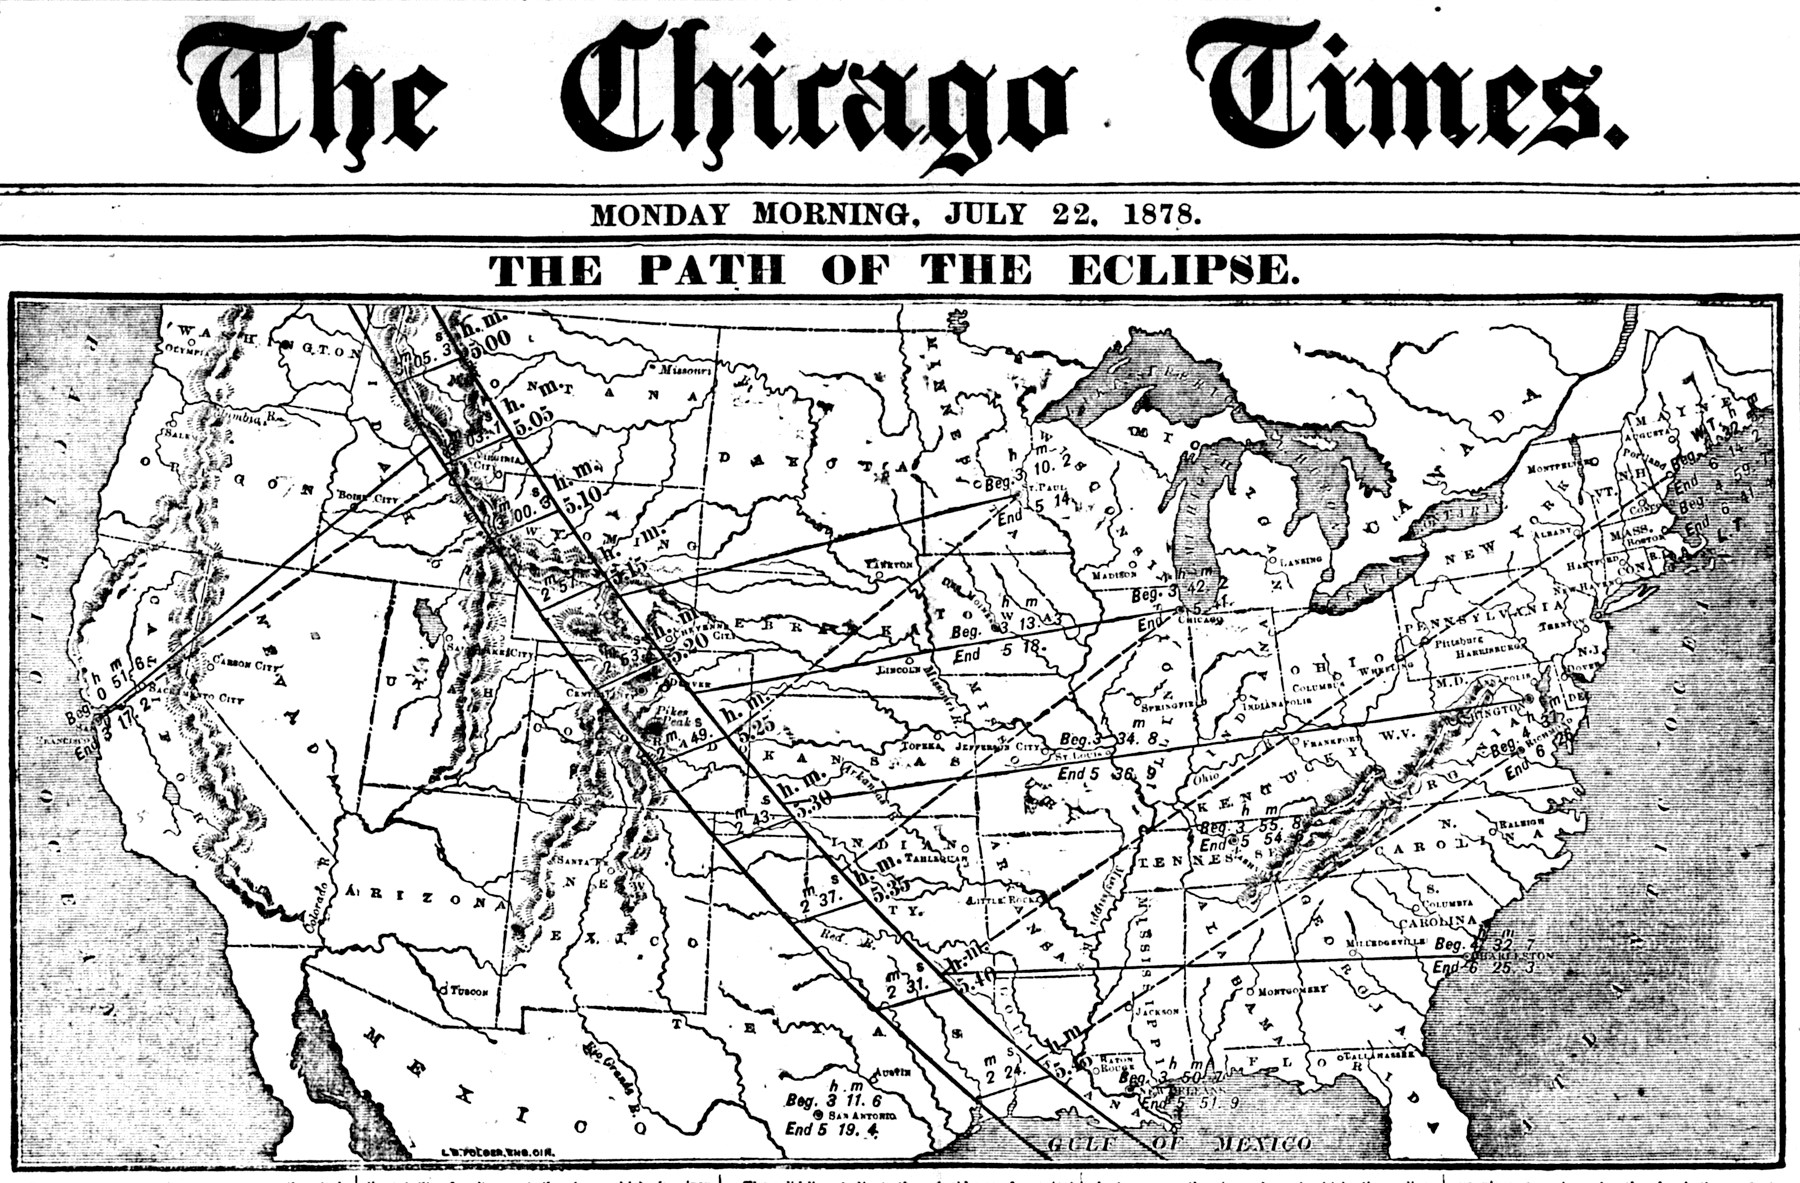 The front page of the Chicago Times dated July 22, 1878. The front page shows a map of the United States with the projected path of the 1878 eclipse. A curved path sweeps across the midsection of the United States, from Montana to Texas, showing where the eclipse was total.